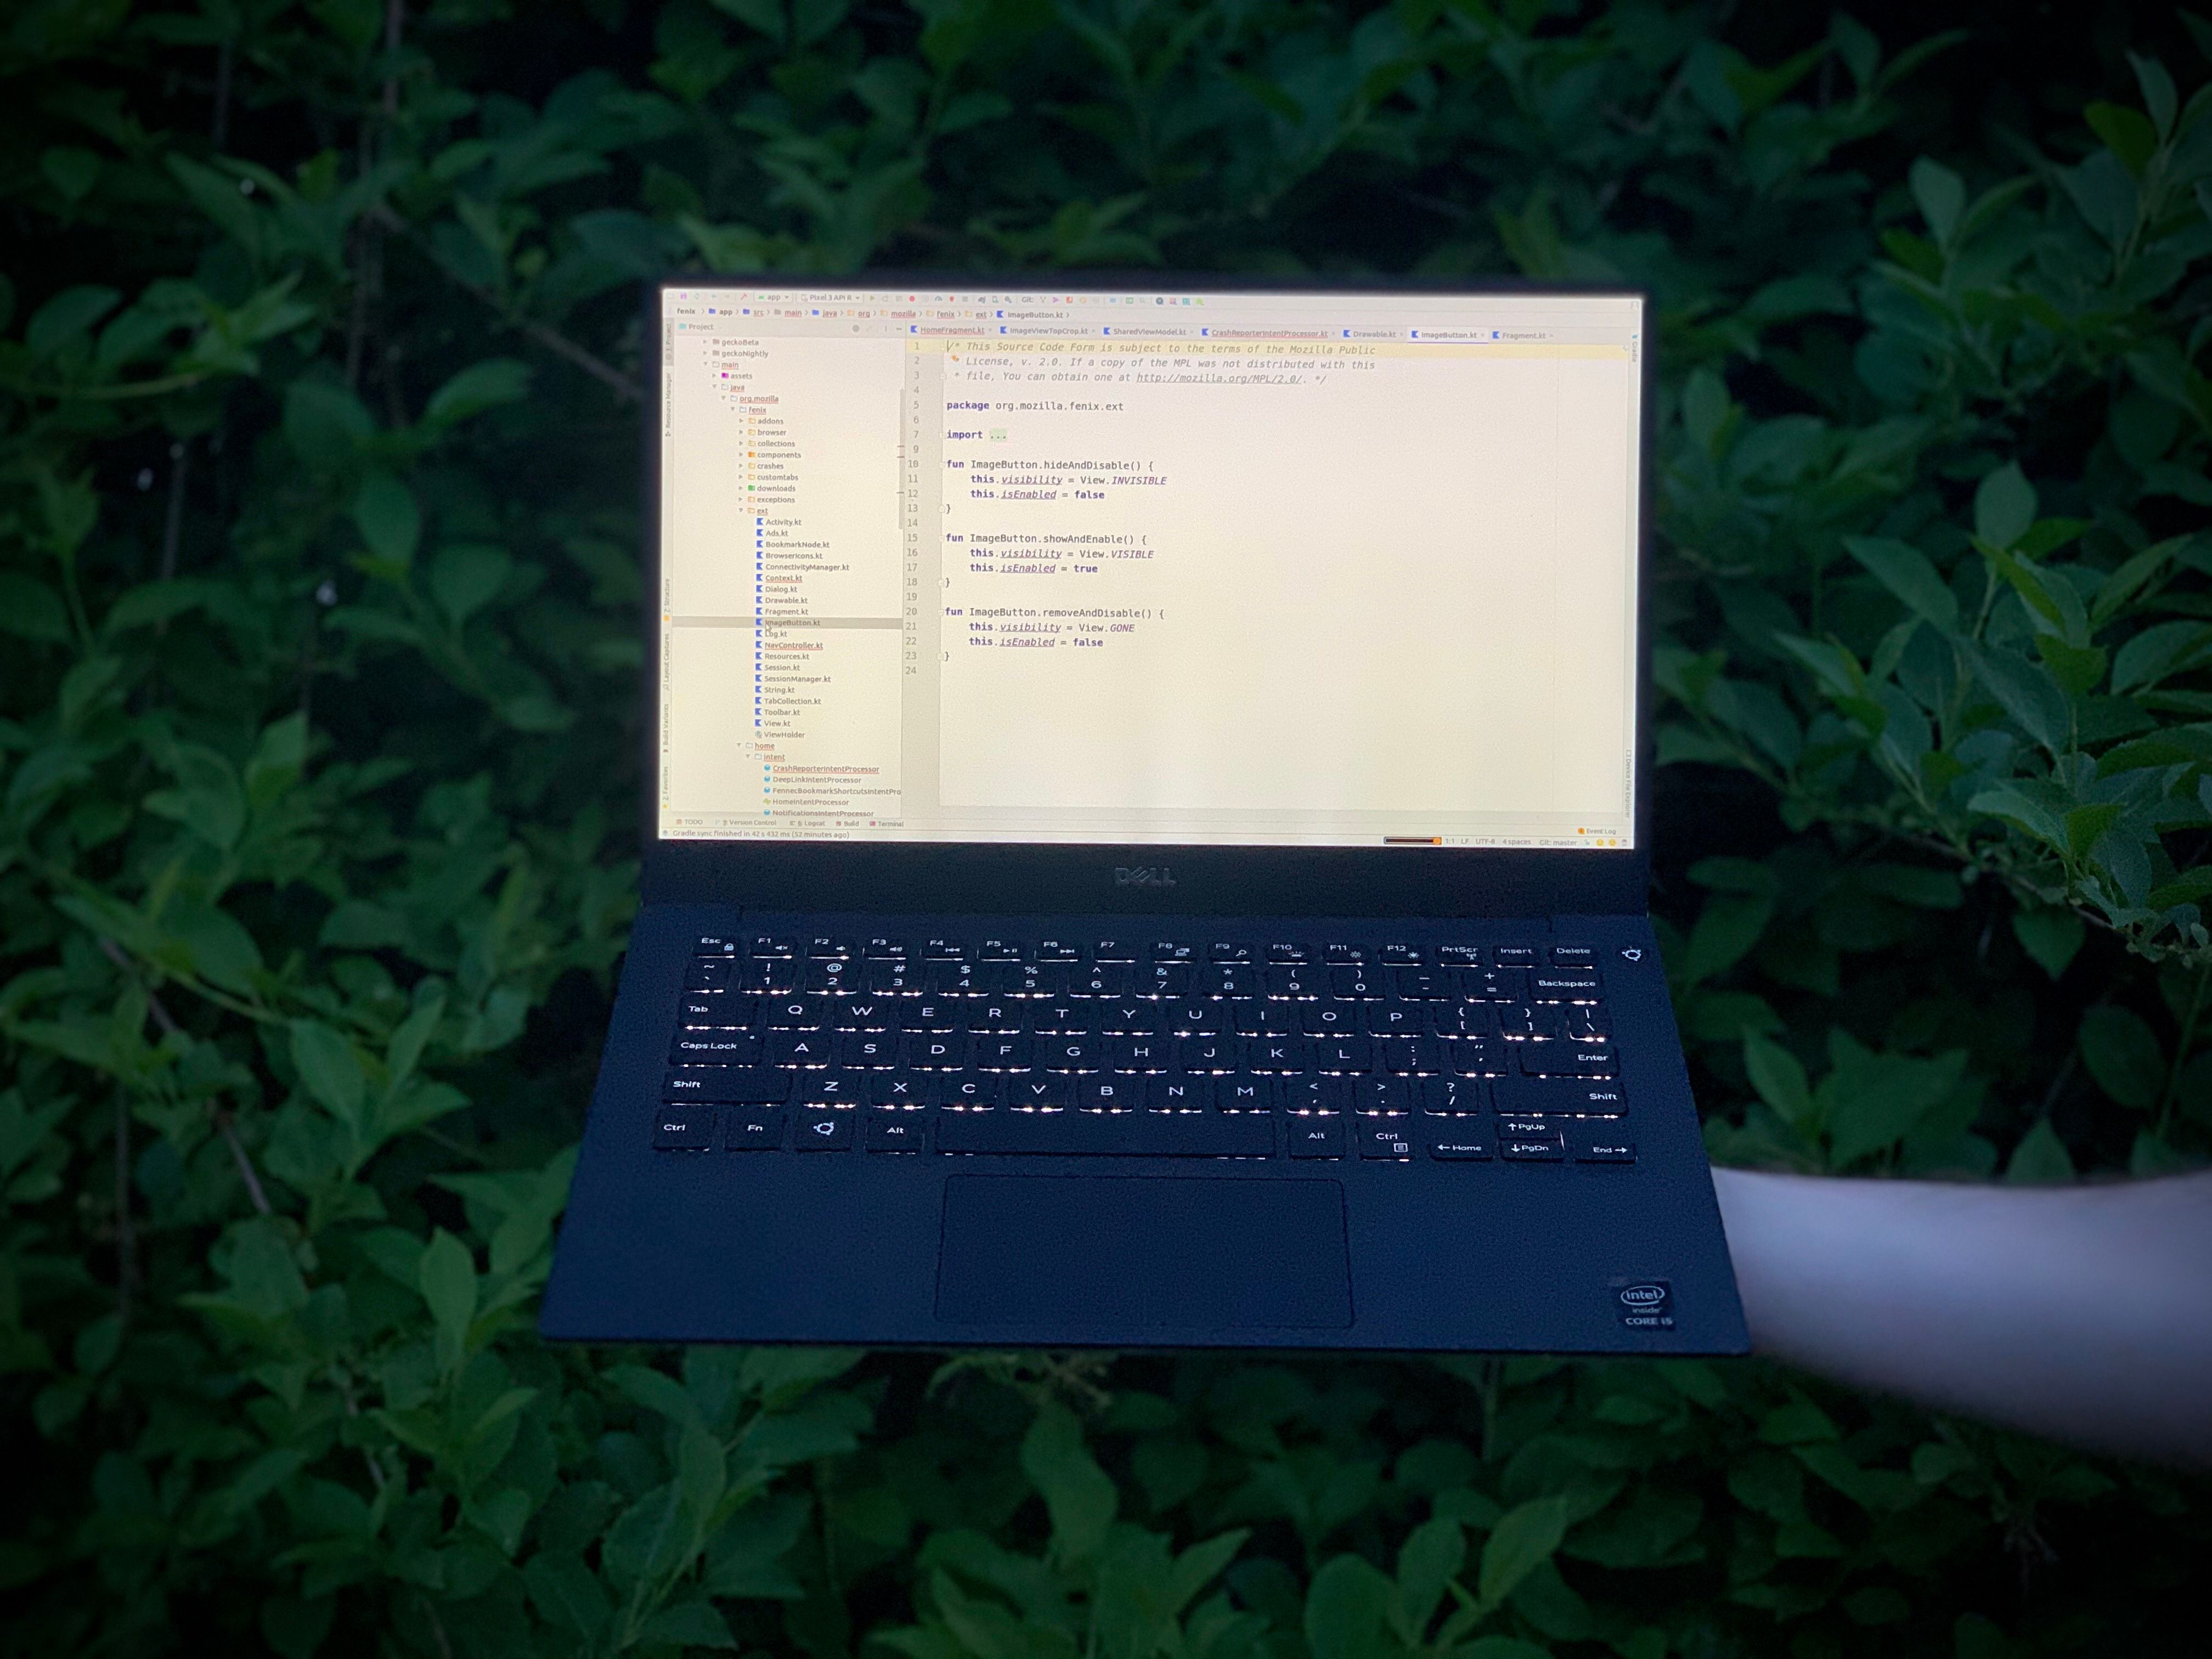 Holding up a laptop with a leafy green background. The laptop is displaying kotlin code from the Firefox Fenix project.